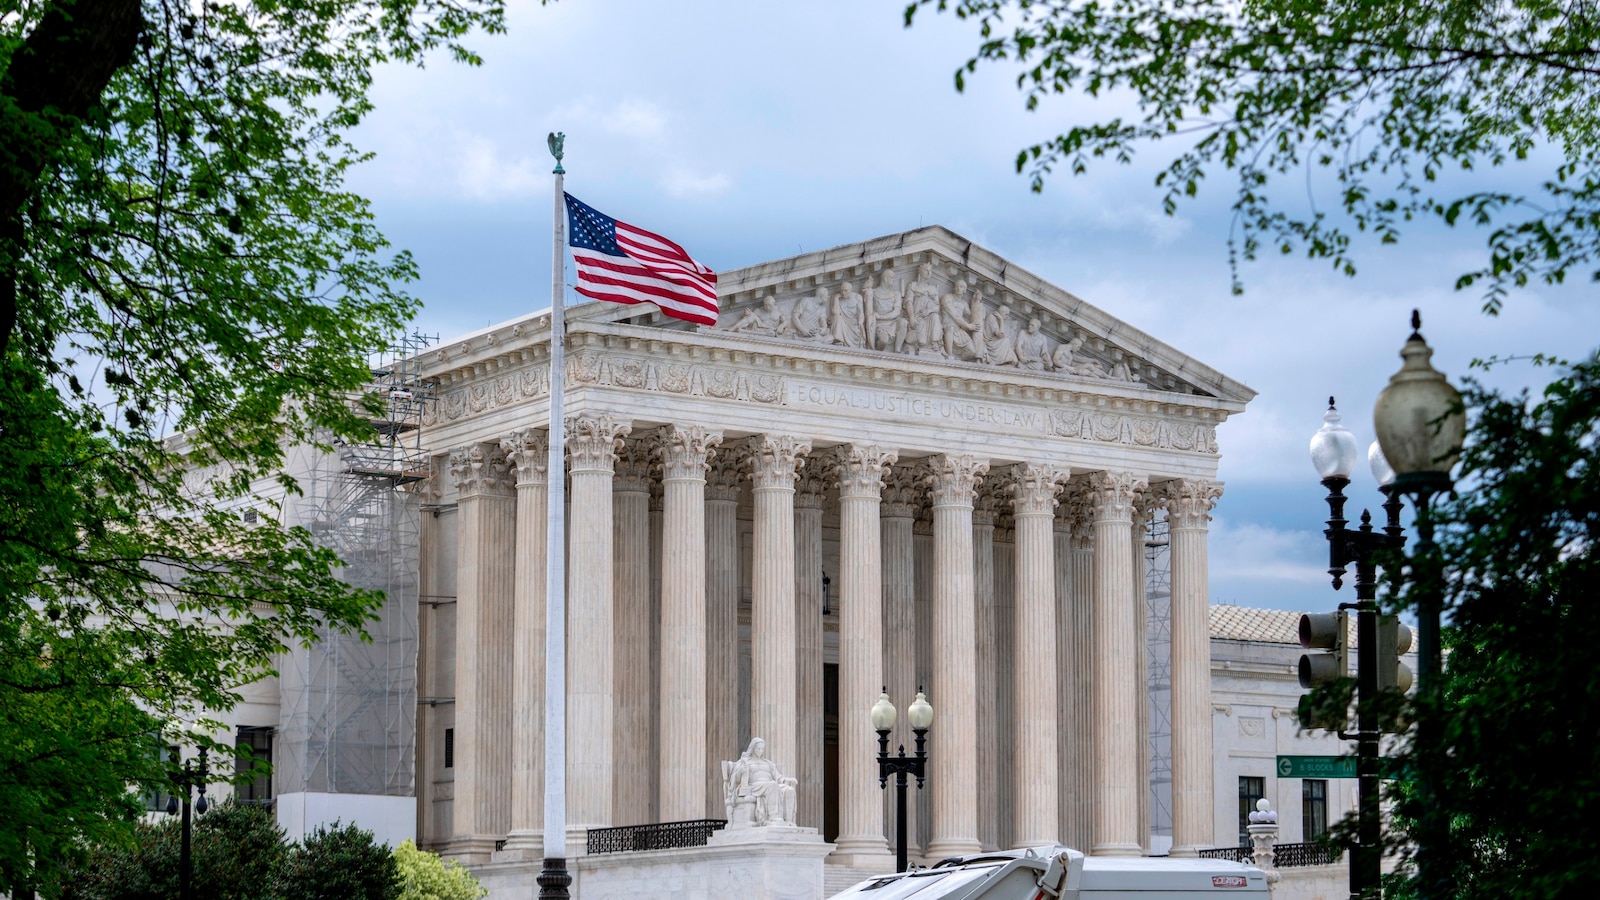 Supreme Court inadvertently posts 'document' about ruling in Idaho abortion case